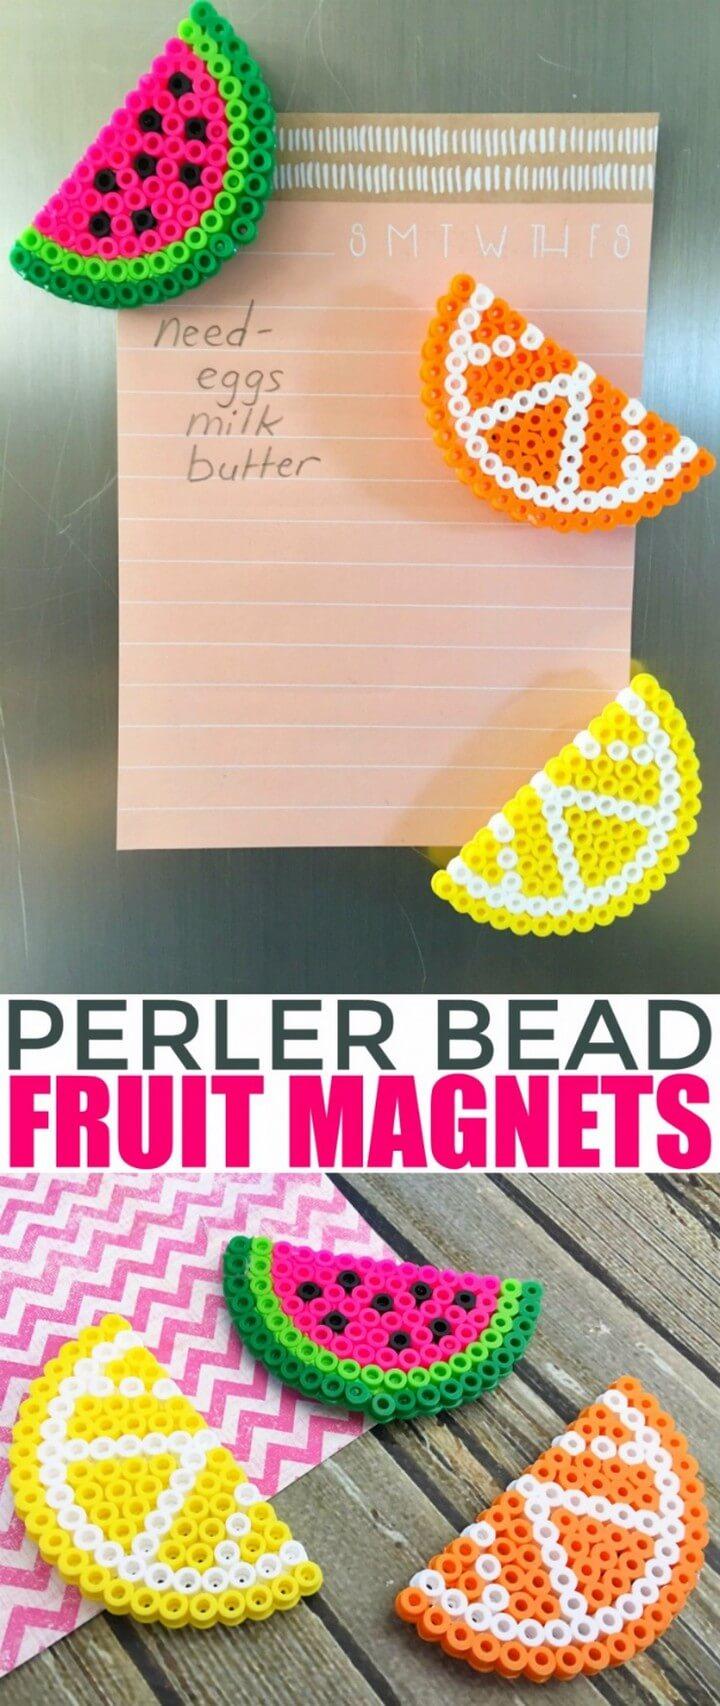 DIY Perler Bead Fruit Magnets, easy craft ideas for kids to make at home, craft activities for kids, craft ideas for kids with paper, art and craft ideas for kids, easy craft ideas for kids at school, fun diy crafts, kids- creative activities at home, arts and crafts to do at home, diy crafts youtube, diy crafts tutorials, diy crafts with paper, diy crafts for home decor, diy crafts for girls, diy crafts for kids, diy crafts to sell, easy diy crafts, craft ideas for the home, craft ideas with paper, diy craft ideas for home decor, craft ideas for adults, craft ideas to sell, easy craft ideas, craft ideas for kids, craft ideas for children, diytomake.com